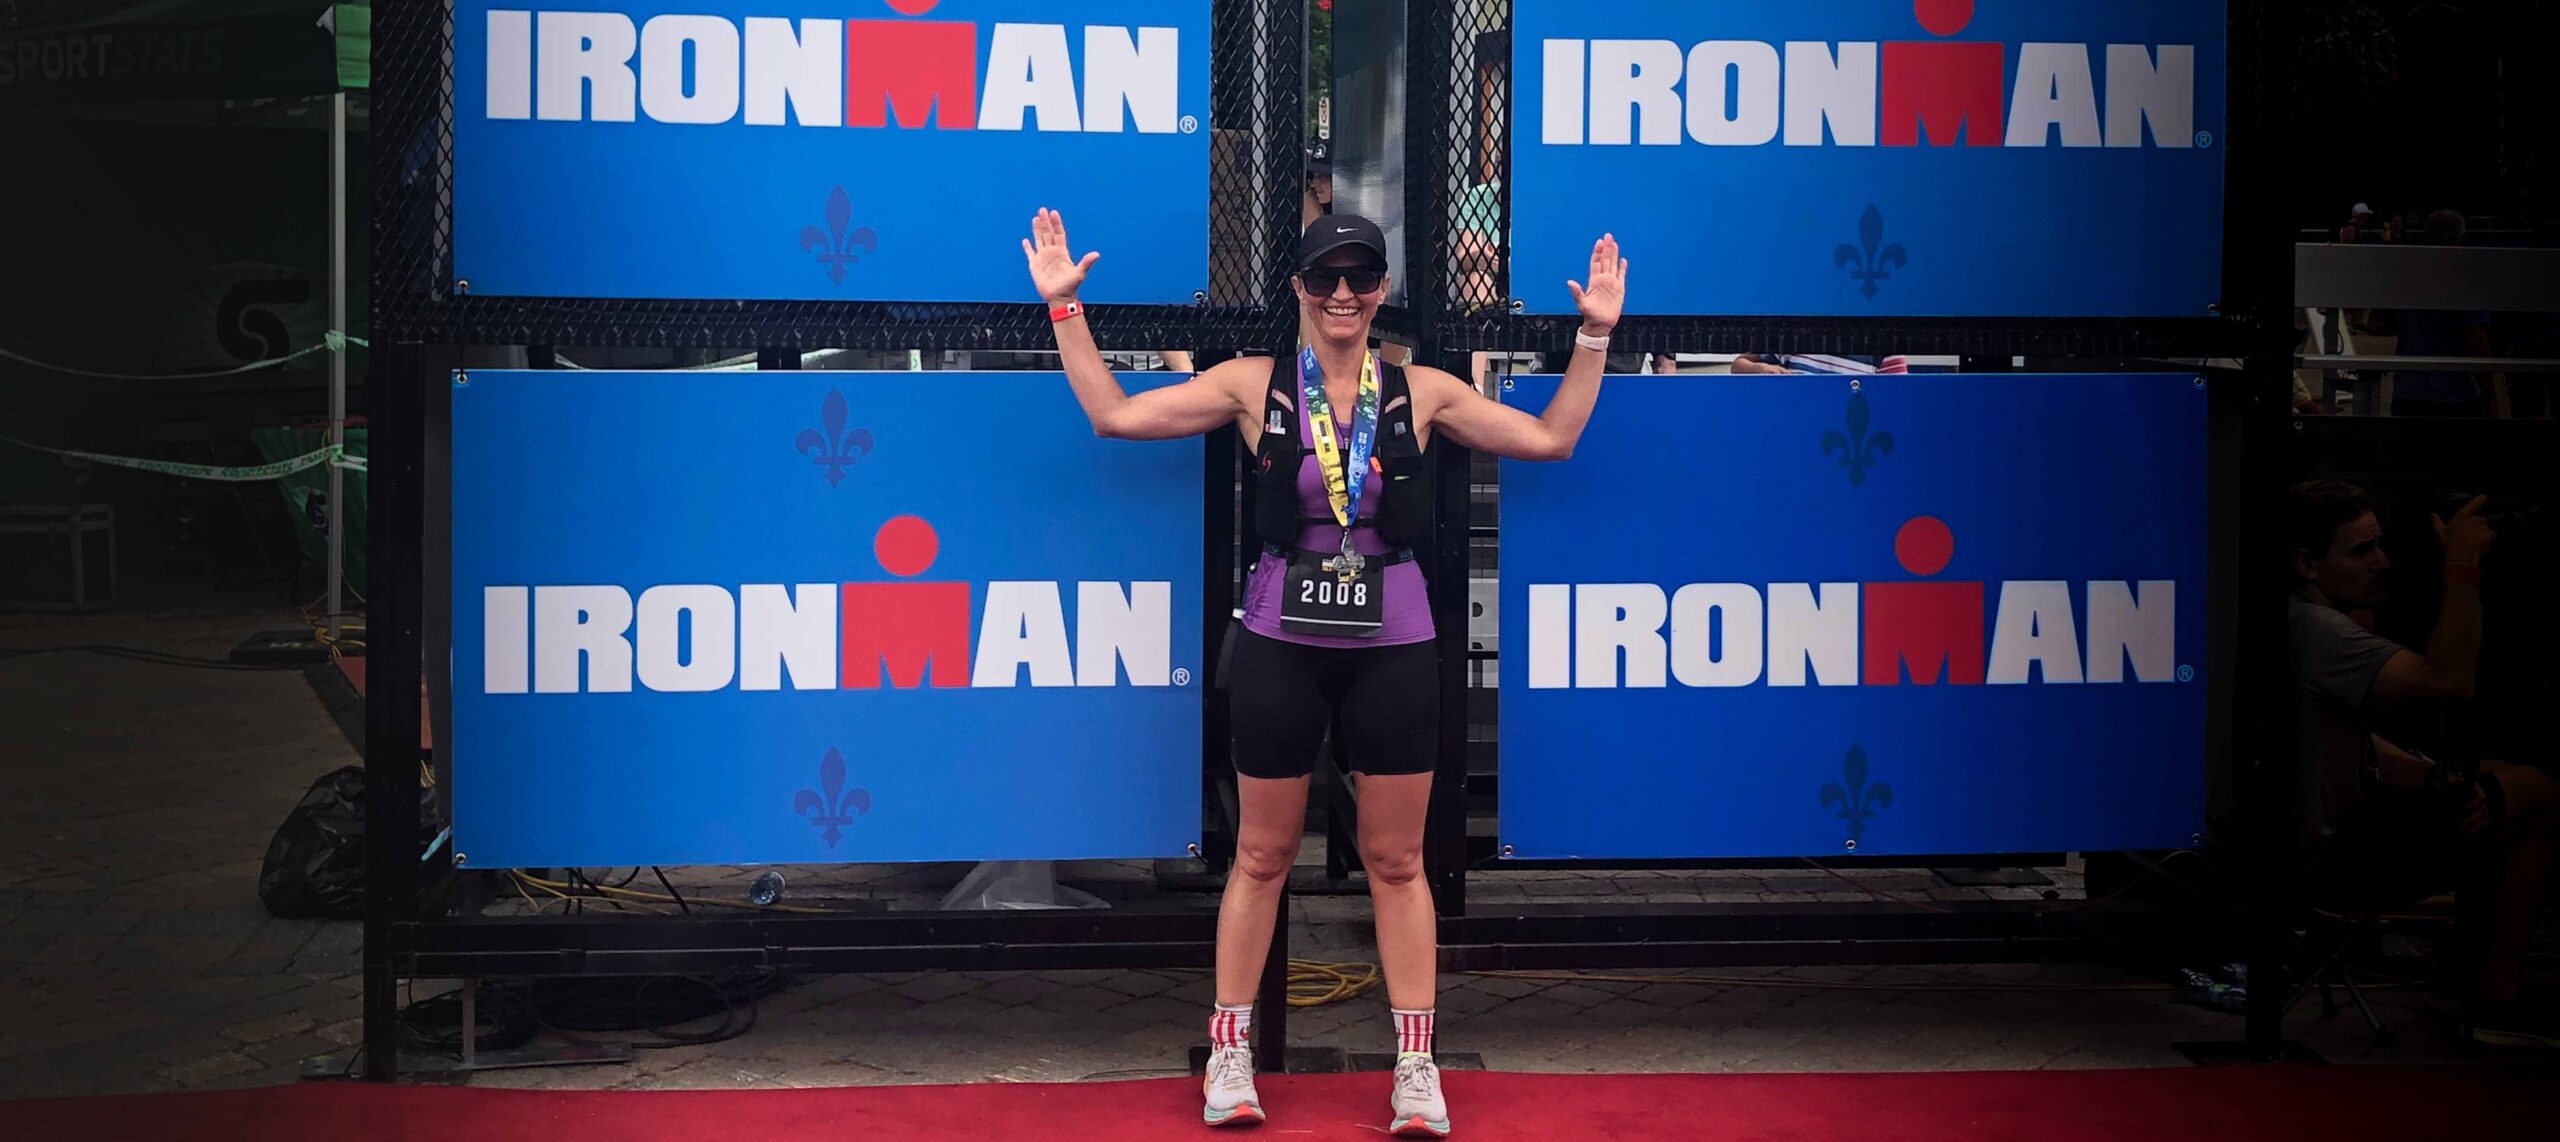 Angèle Lamothe competes in an Ironman triathlon race